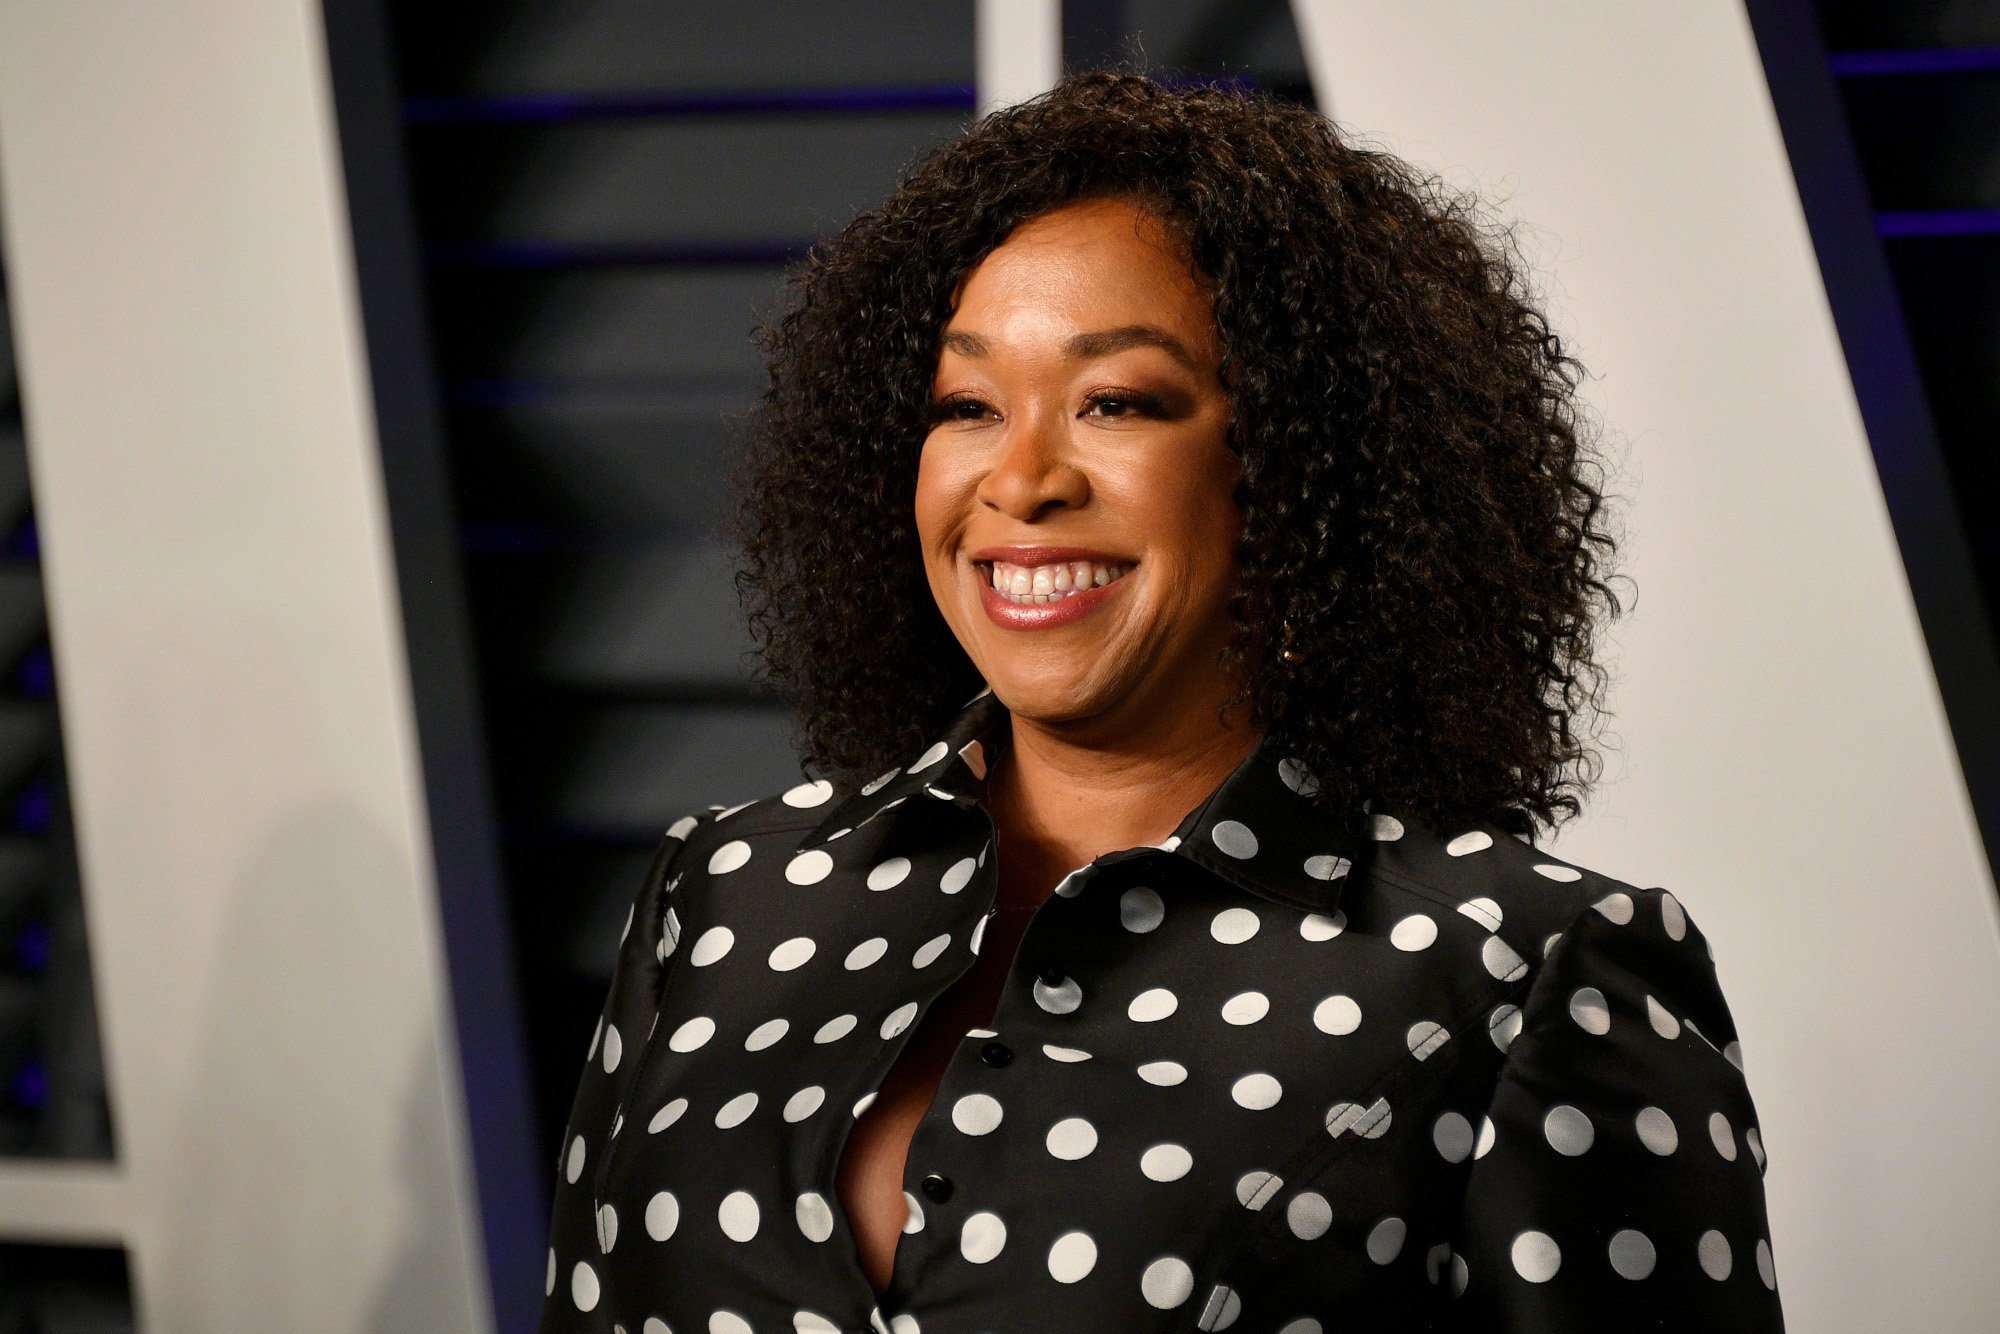 'Grey's Anatomy' creator Shonda Rhimes attending Vanity Fair's Oscar Party. Her hair is curled, and she's wearing a black dress with white polkadots.